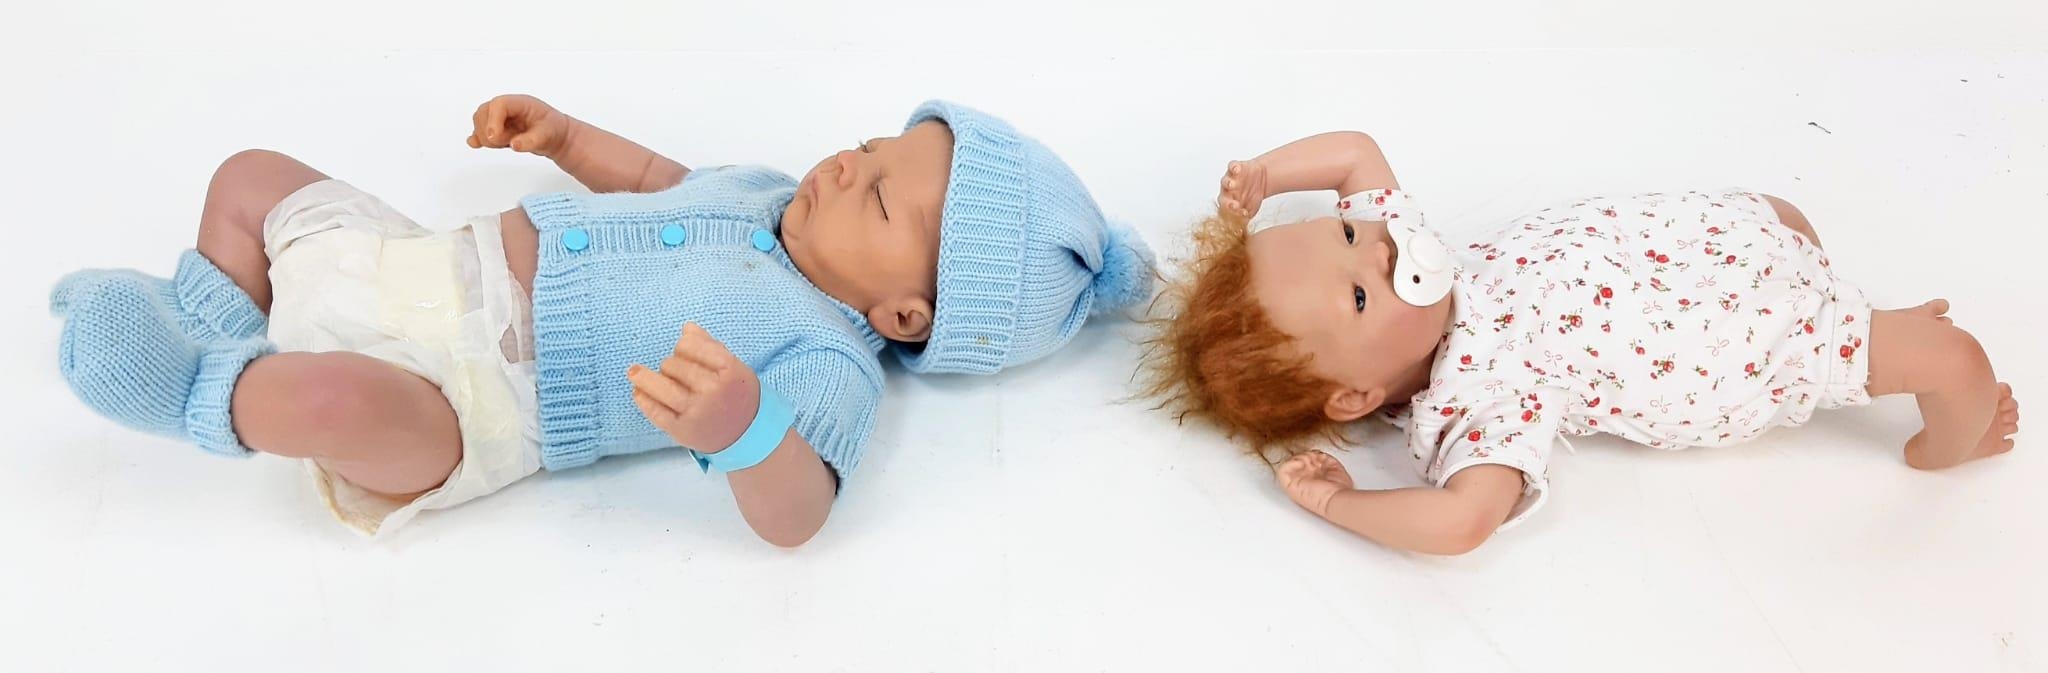 A pair of Re-Born silicone lifelike dolls. In excellent condition. 45cm - Image 2 of 3